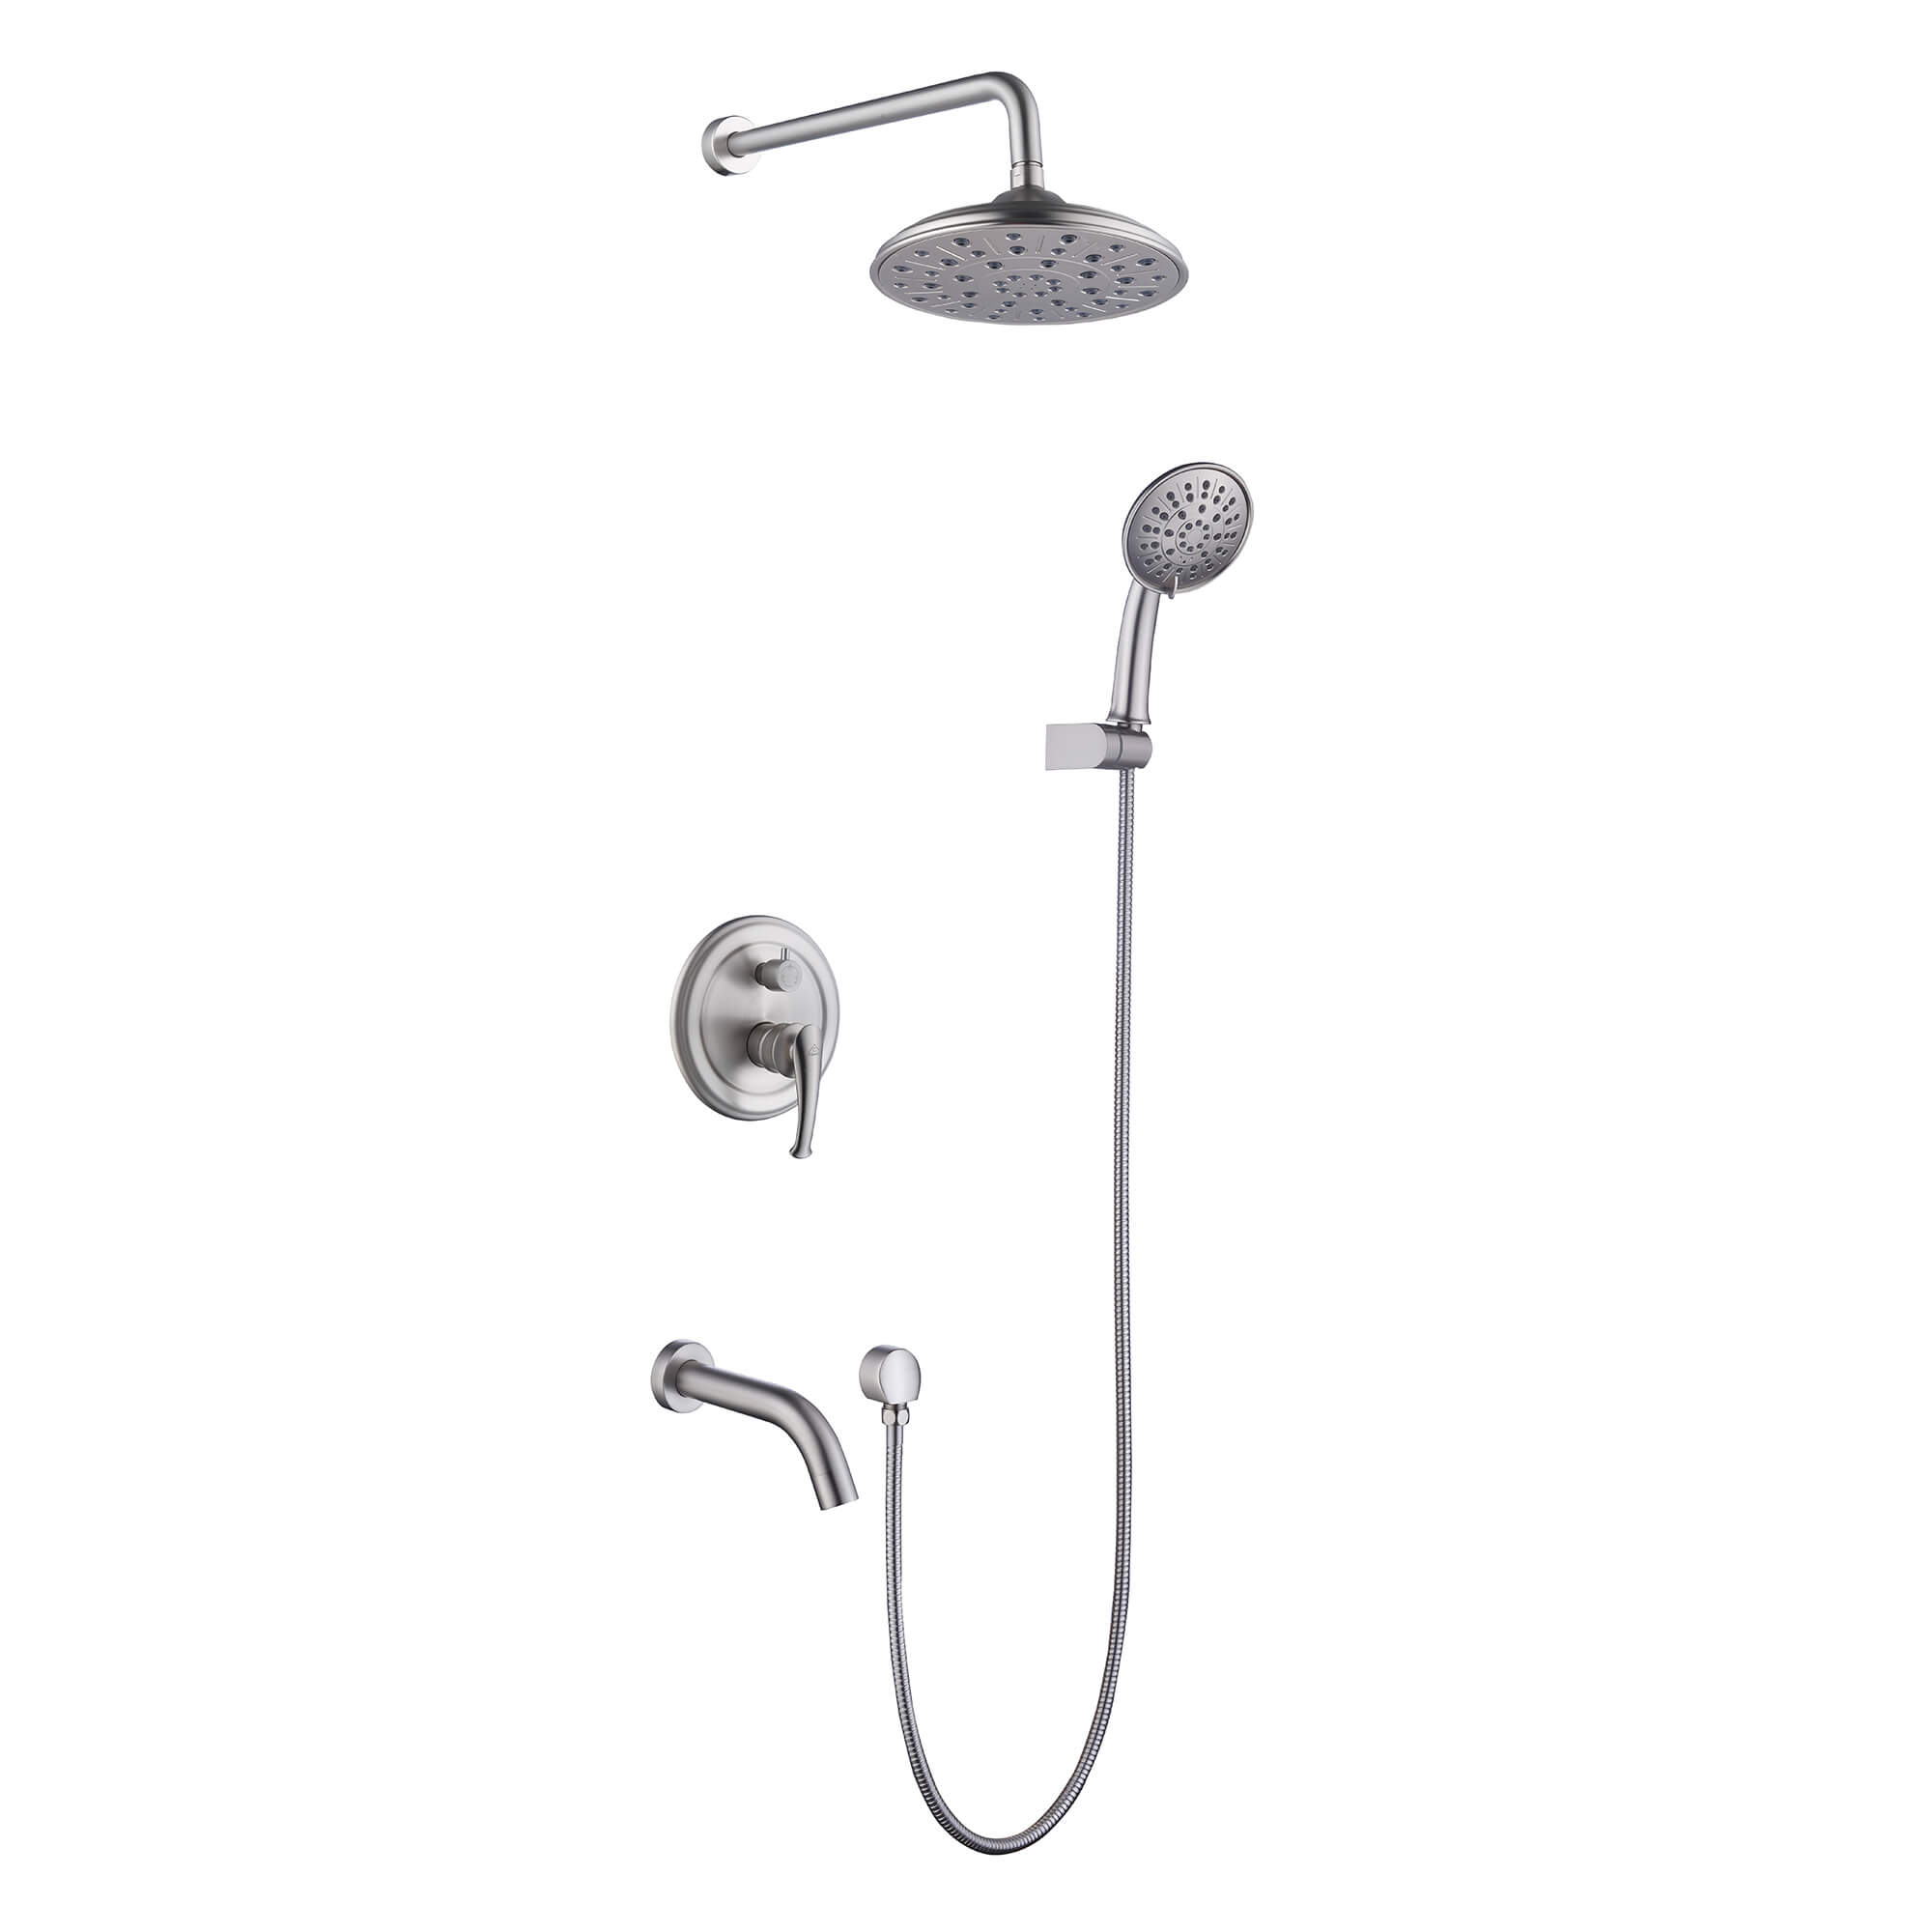 CASAINC Brushed Nickel Wall Mounted Rain Shower Faucet with Pressure Balanced Valve and Bathtub Spout-Casainc Canada